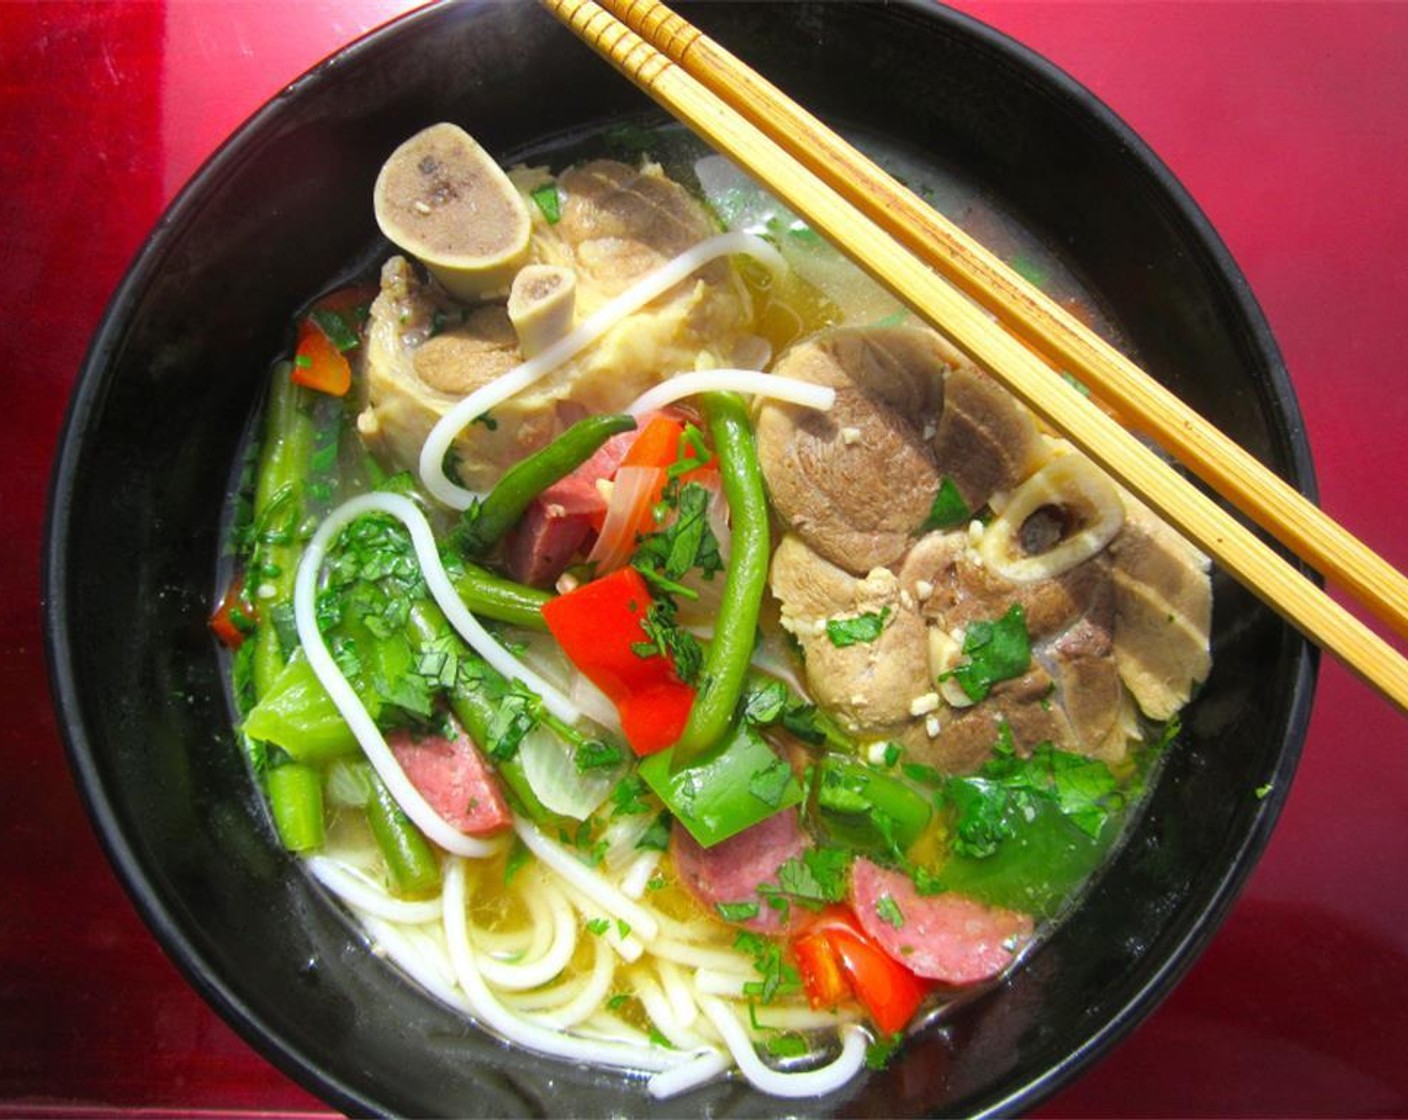 step 6 To serve, top noodles with meat, vegetables and broth, sprinkle with chopped Fresh Cilantro (to taste). Enjoy!